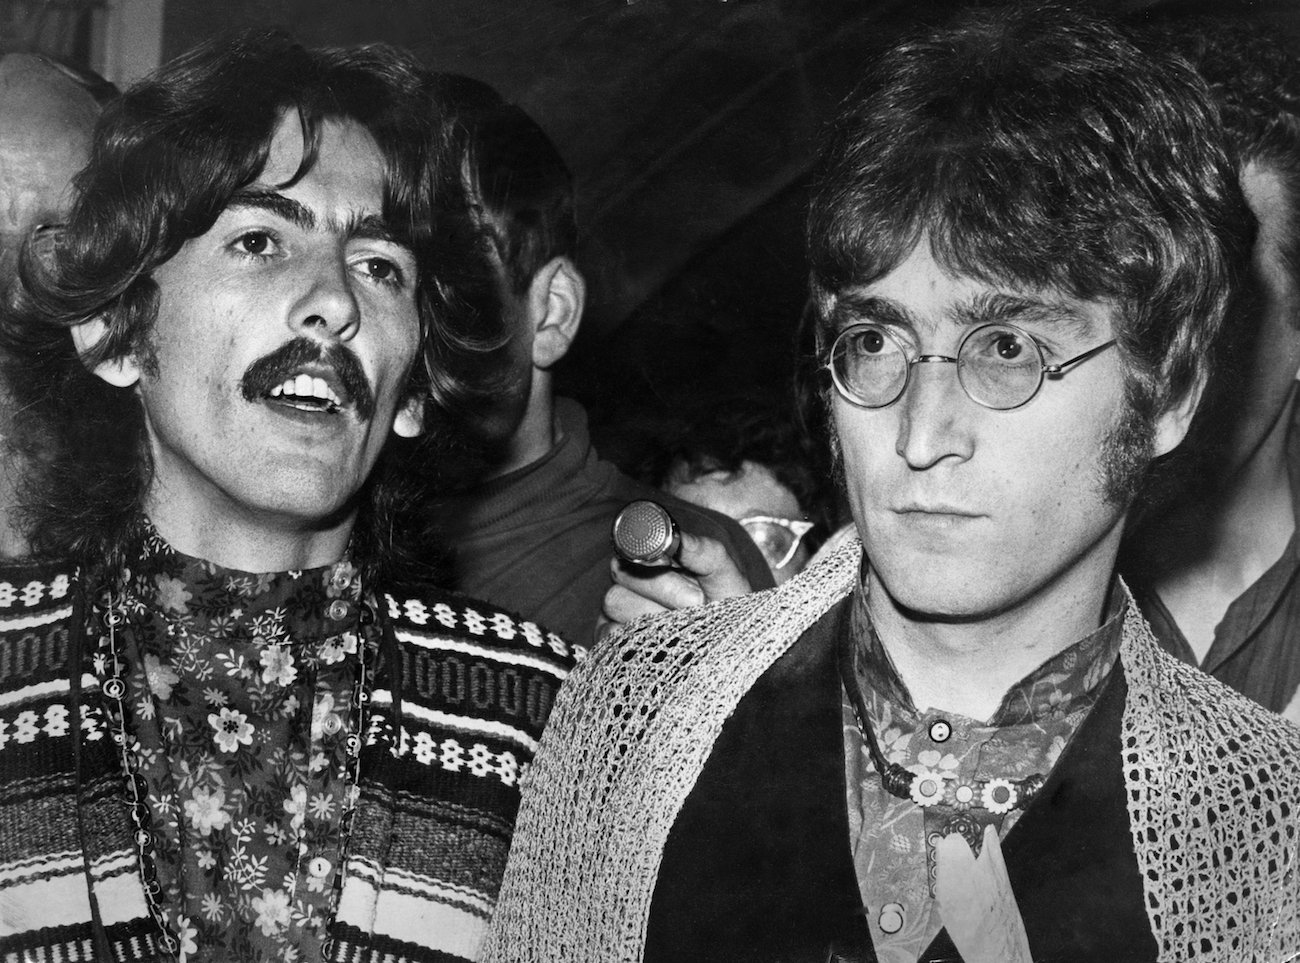 George Harrison and John Lennon following the death of The Beatles' manager, Brian Esptein.